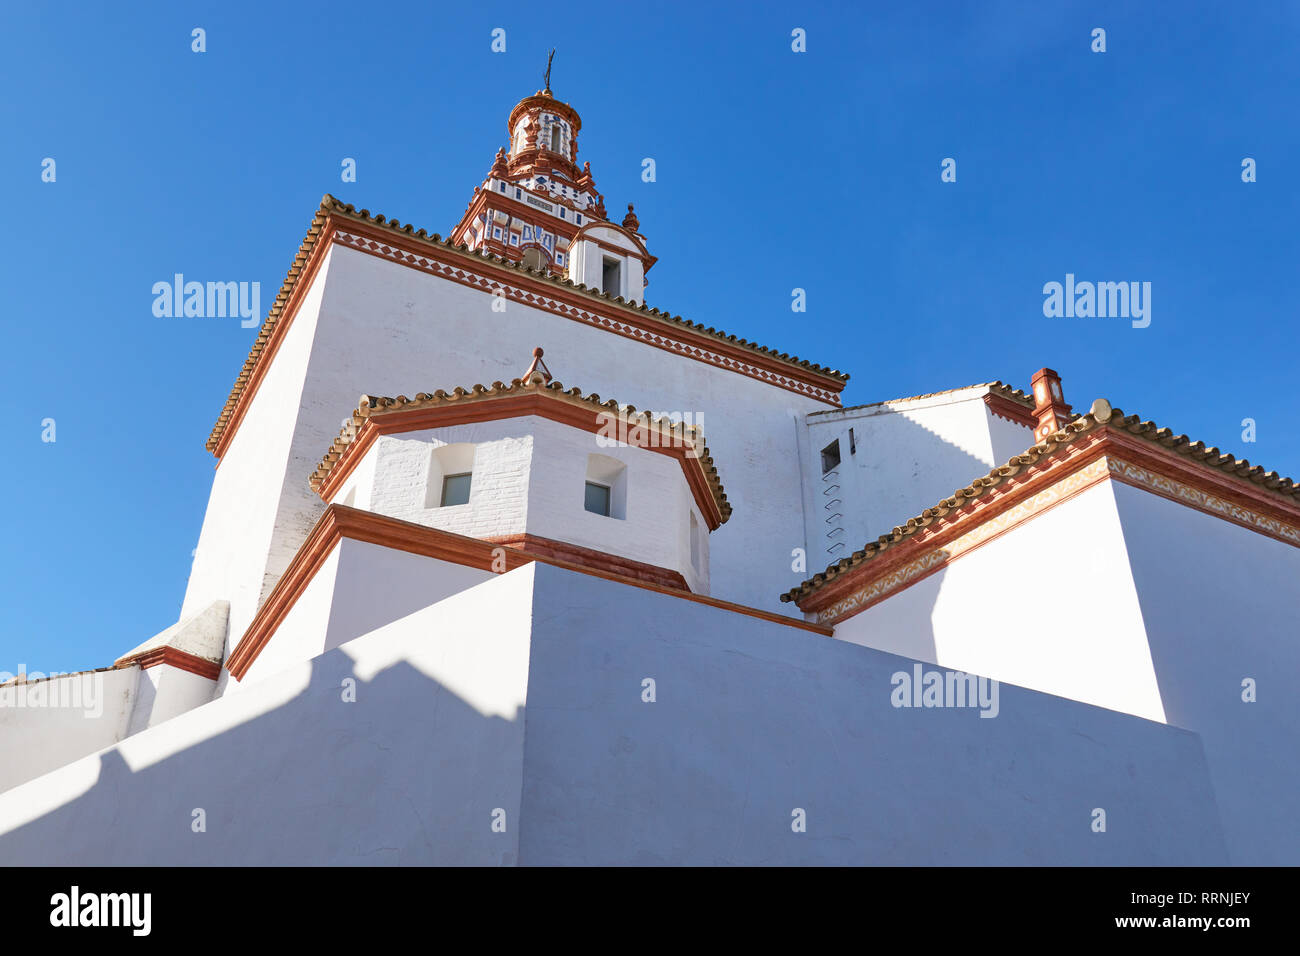 Church of Fuentes de Andalusia, municipality of Seville. Spain Stock Photo